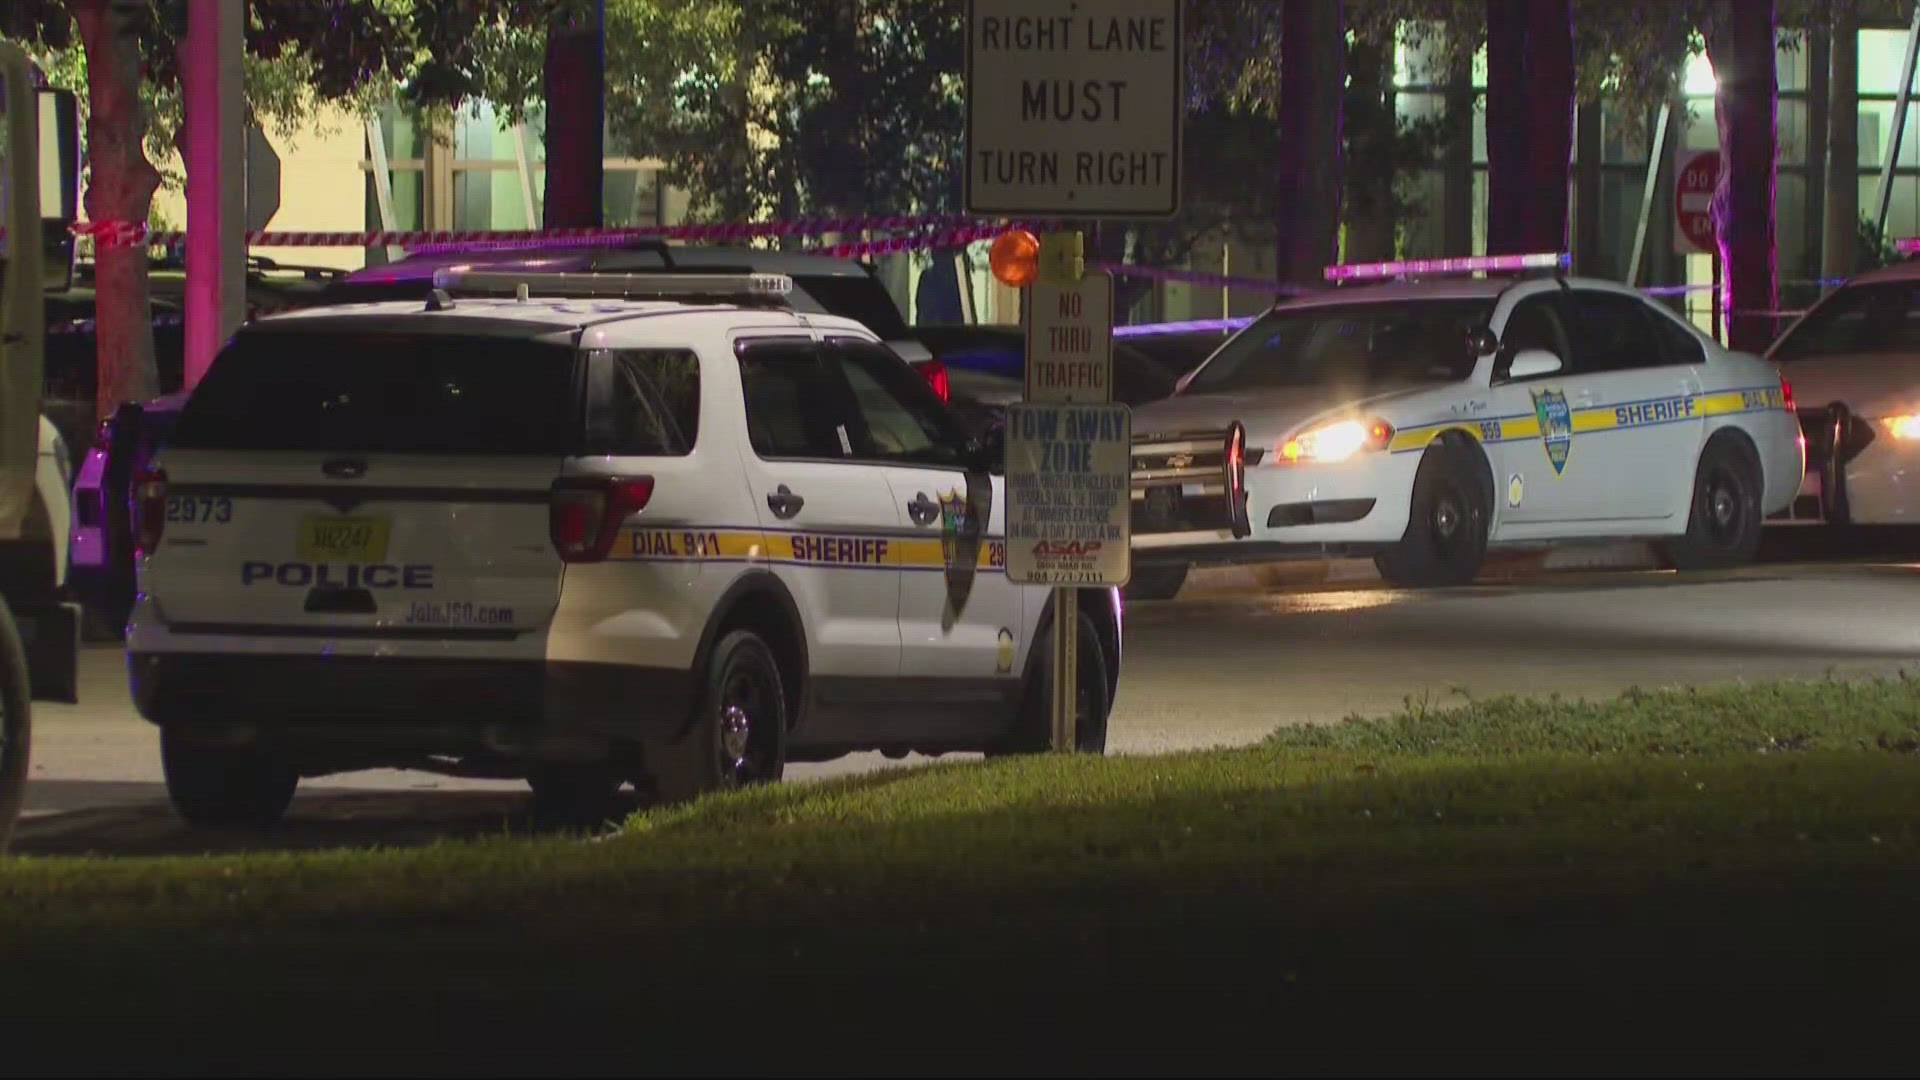 The man who was shot and killed by police Tuesday night in the parking lot of Baptist Health South, after he reportedly shot an officer in the face, has been identif